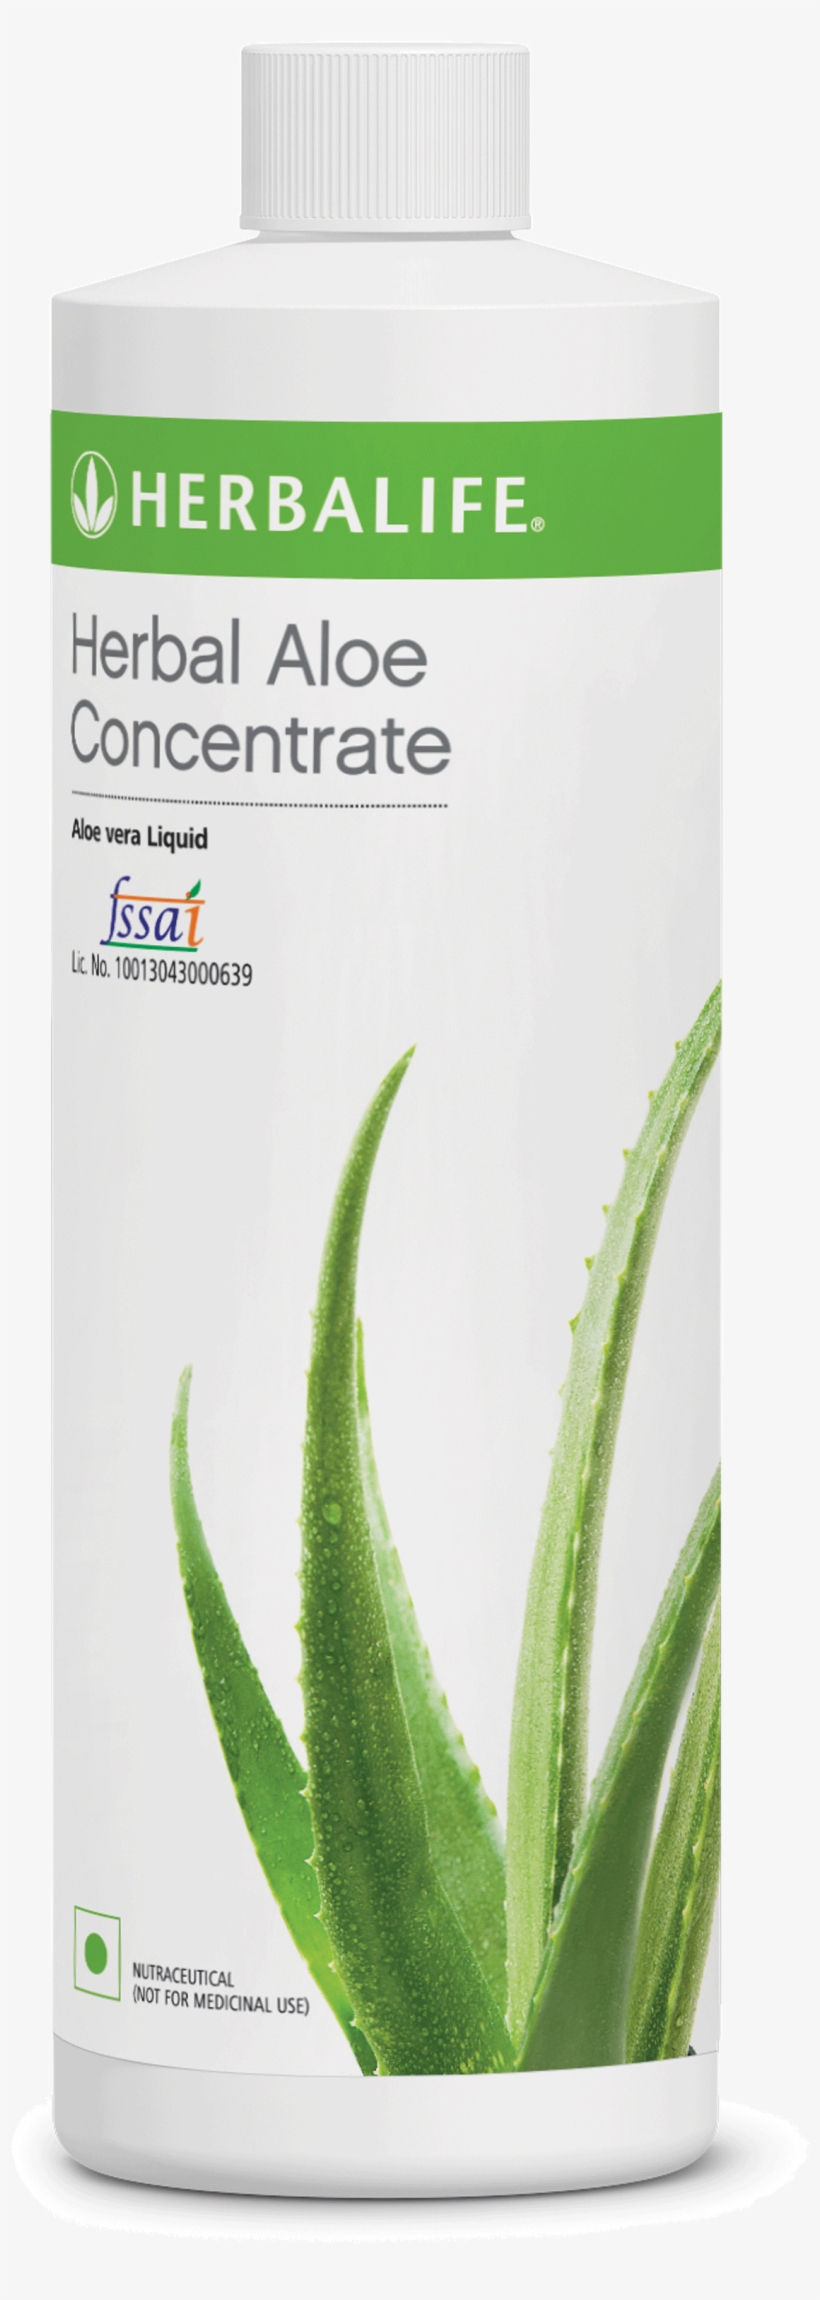 Herbalife India Launches Herbal Aloe Concentrate To - Aloe Herbalife Png, transparent png #1267002